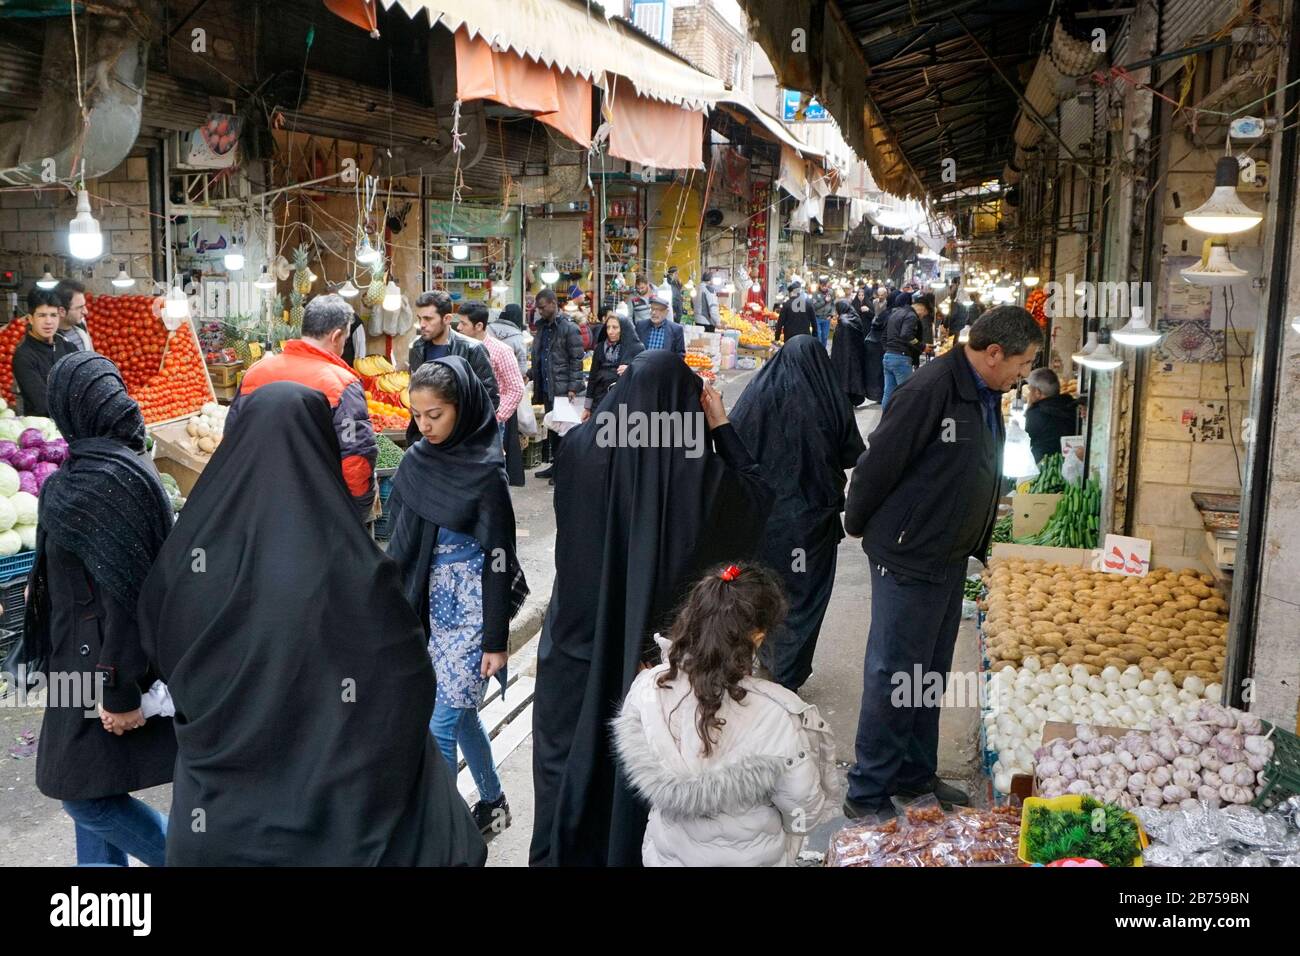 Bazaar in Tehran, Iran, on 18.03.2019. After the USA withdrew from the international nuclear agreement, the country is again imposing sanctions against Iran. [automated translation] Stock Photo